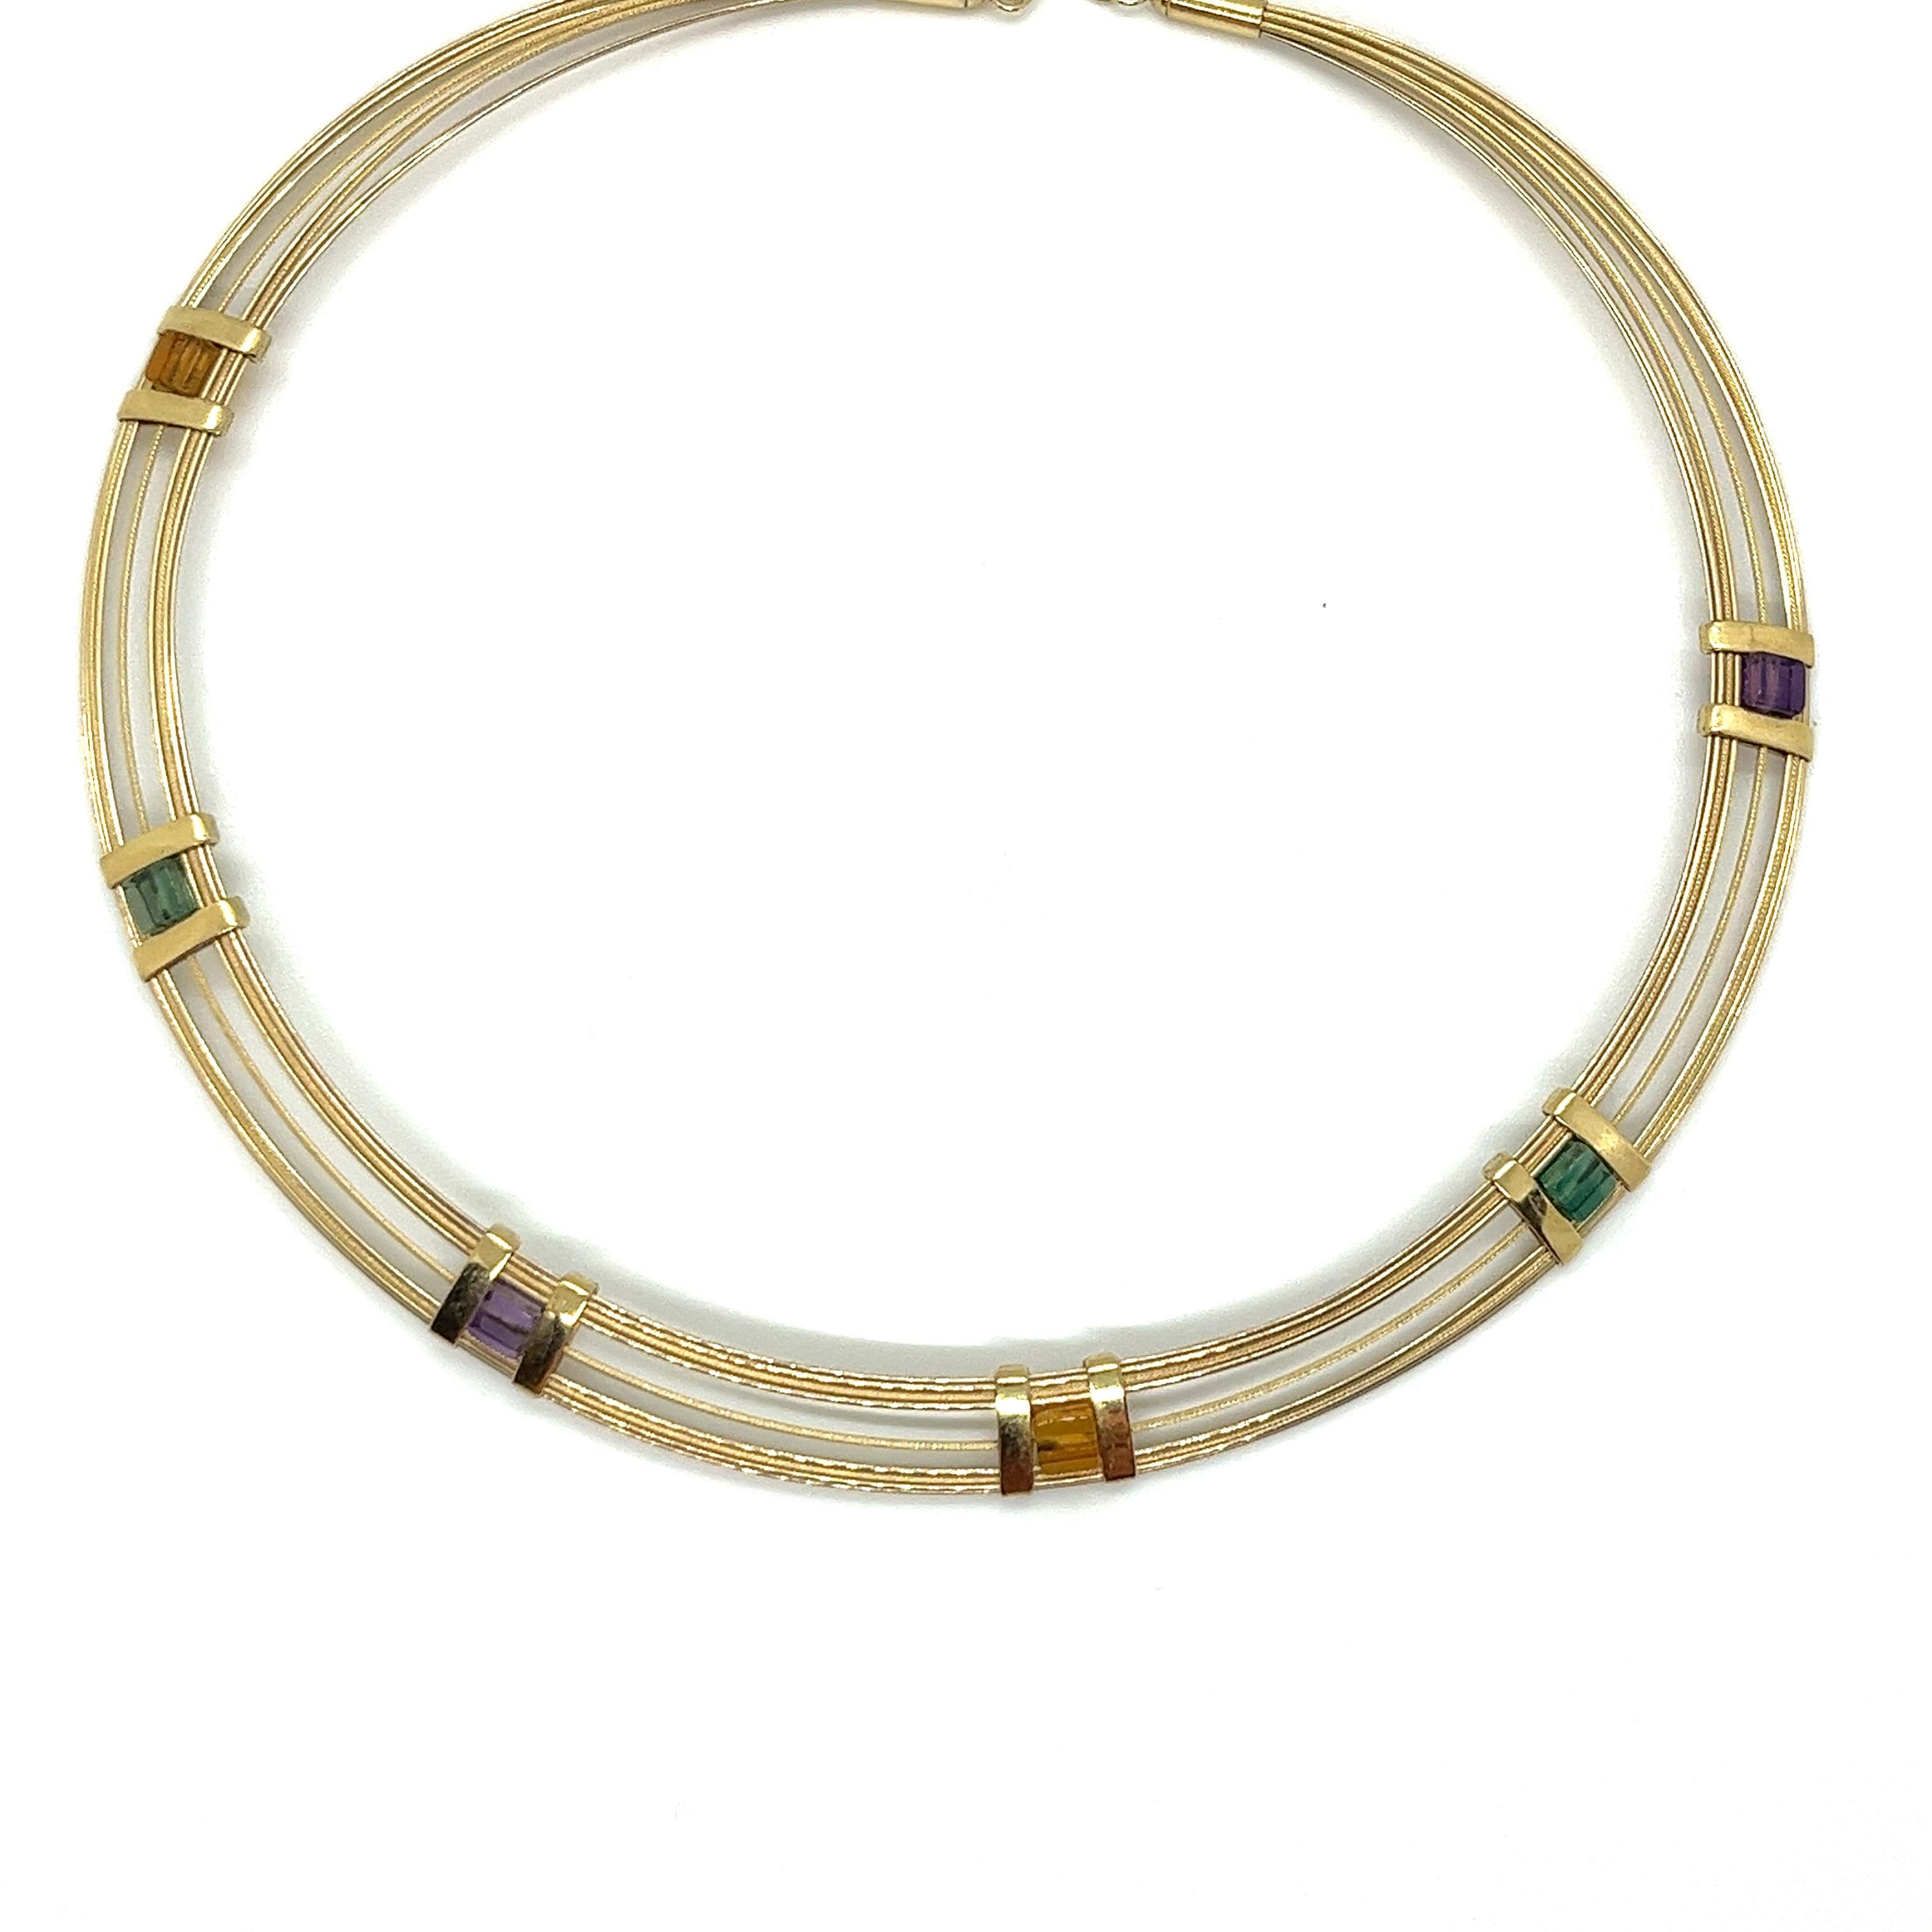 Vintage 14KY Gold Collar Necklace with Semi-Precious Gemstones - The necklaces is made up with 9 individual plain and cable twisted 14k yellow gold wires attached at the back with 14k end caps. The 5mm cube shape gemstones are Amethysts, Citrines,